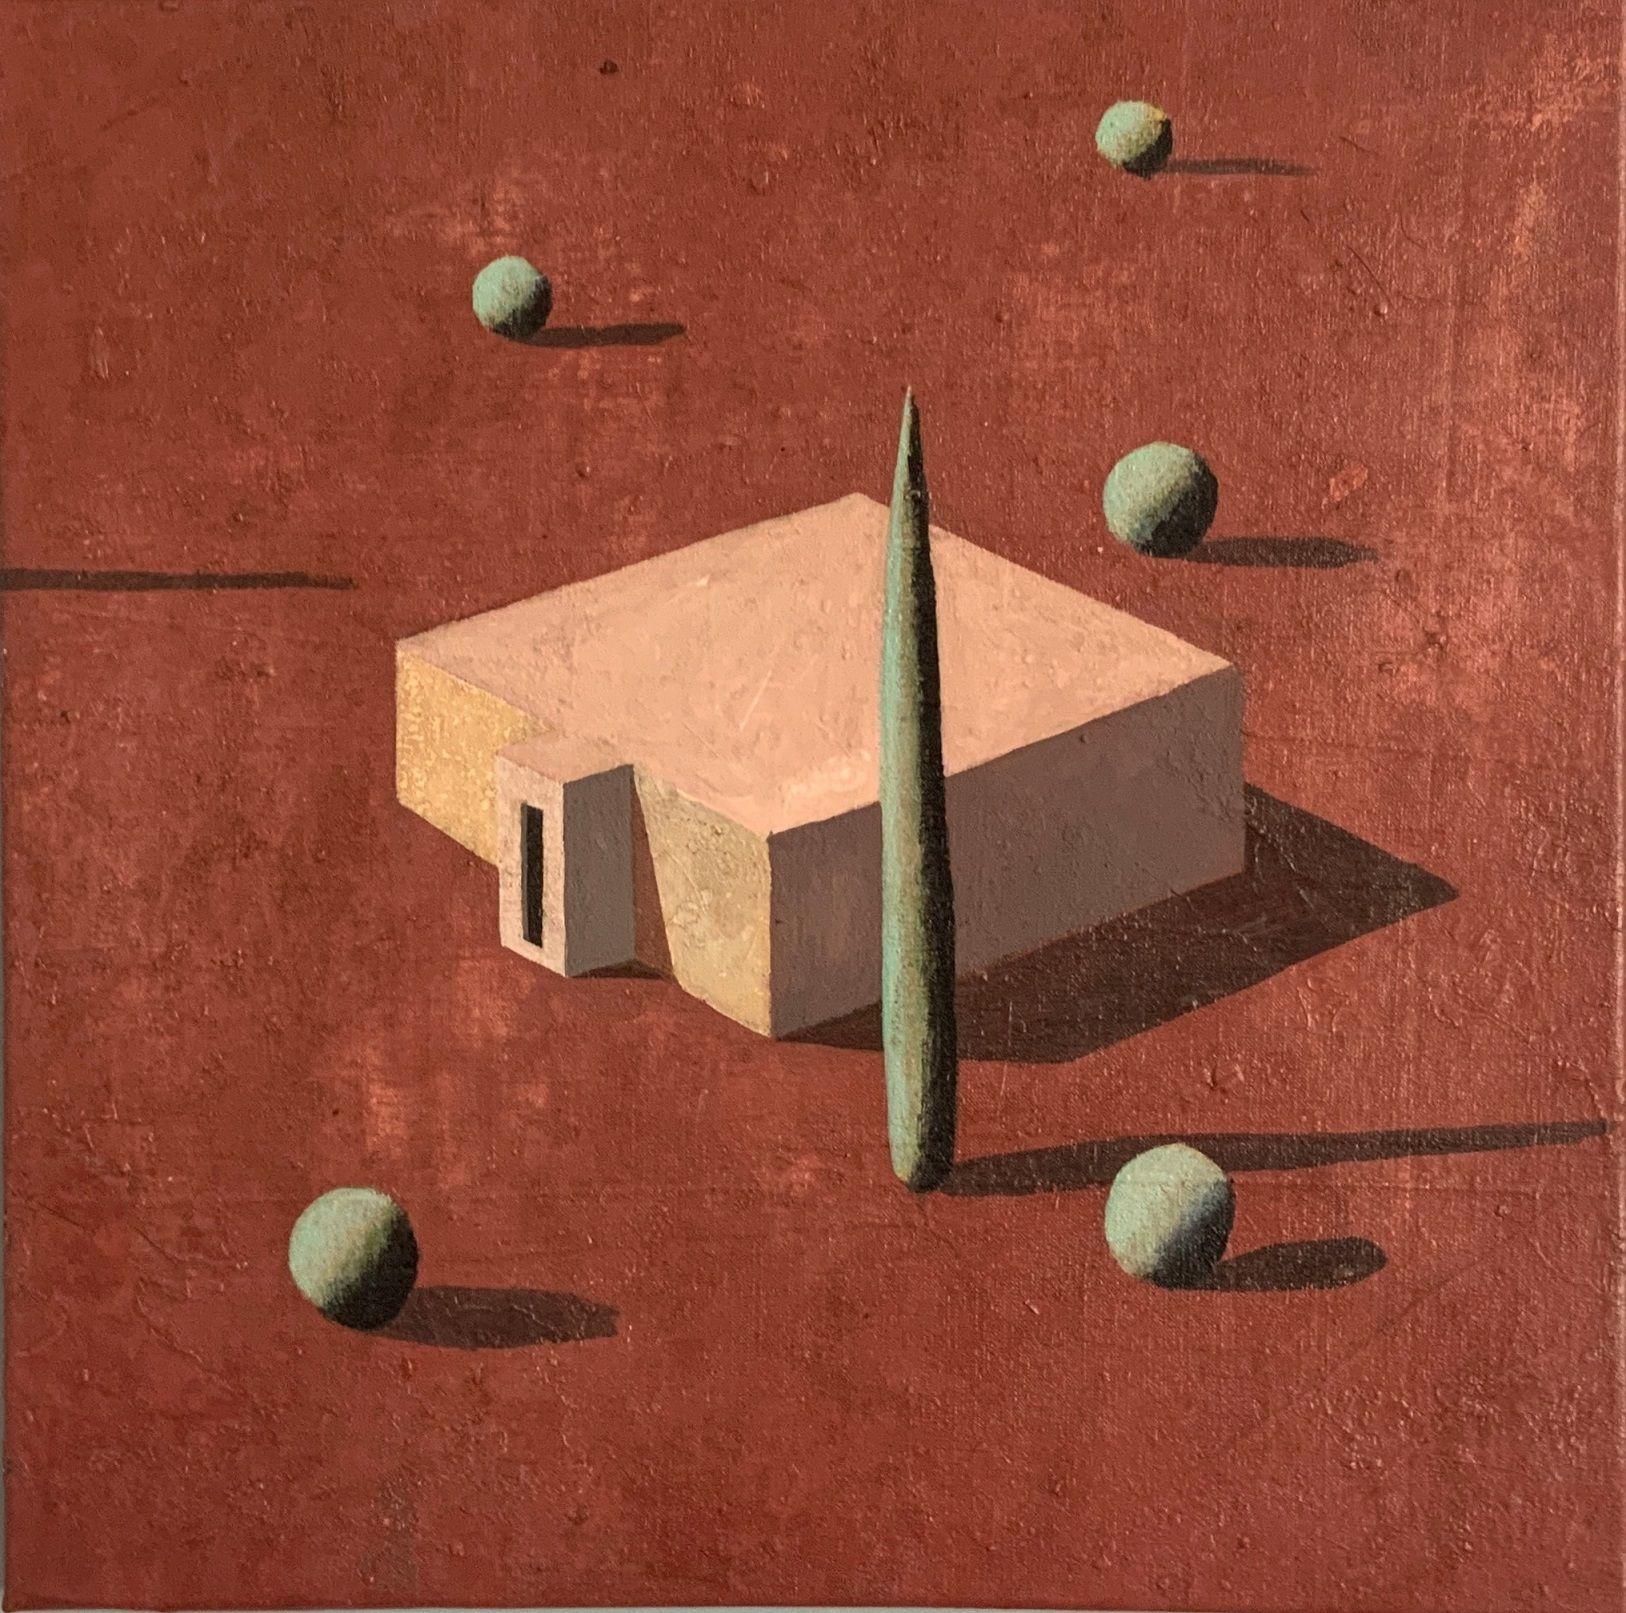 JAIN-B is a unique acrylic on canvas painting by contemporary artist Ramon Enrich, dimensions are 50 x 50 cm (19.7 × 19.7 in). 
The artwork is signed, sold unframed and comes with a certificate of authenticity. 

Ramon Enrich harnesses his passion